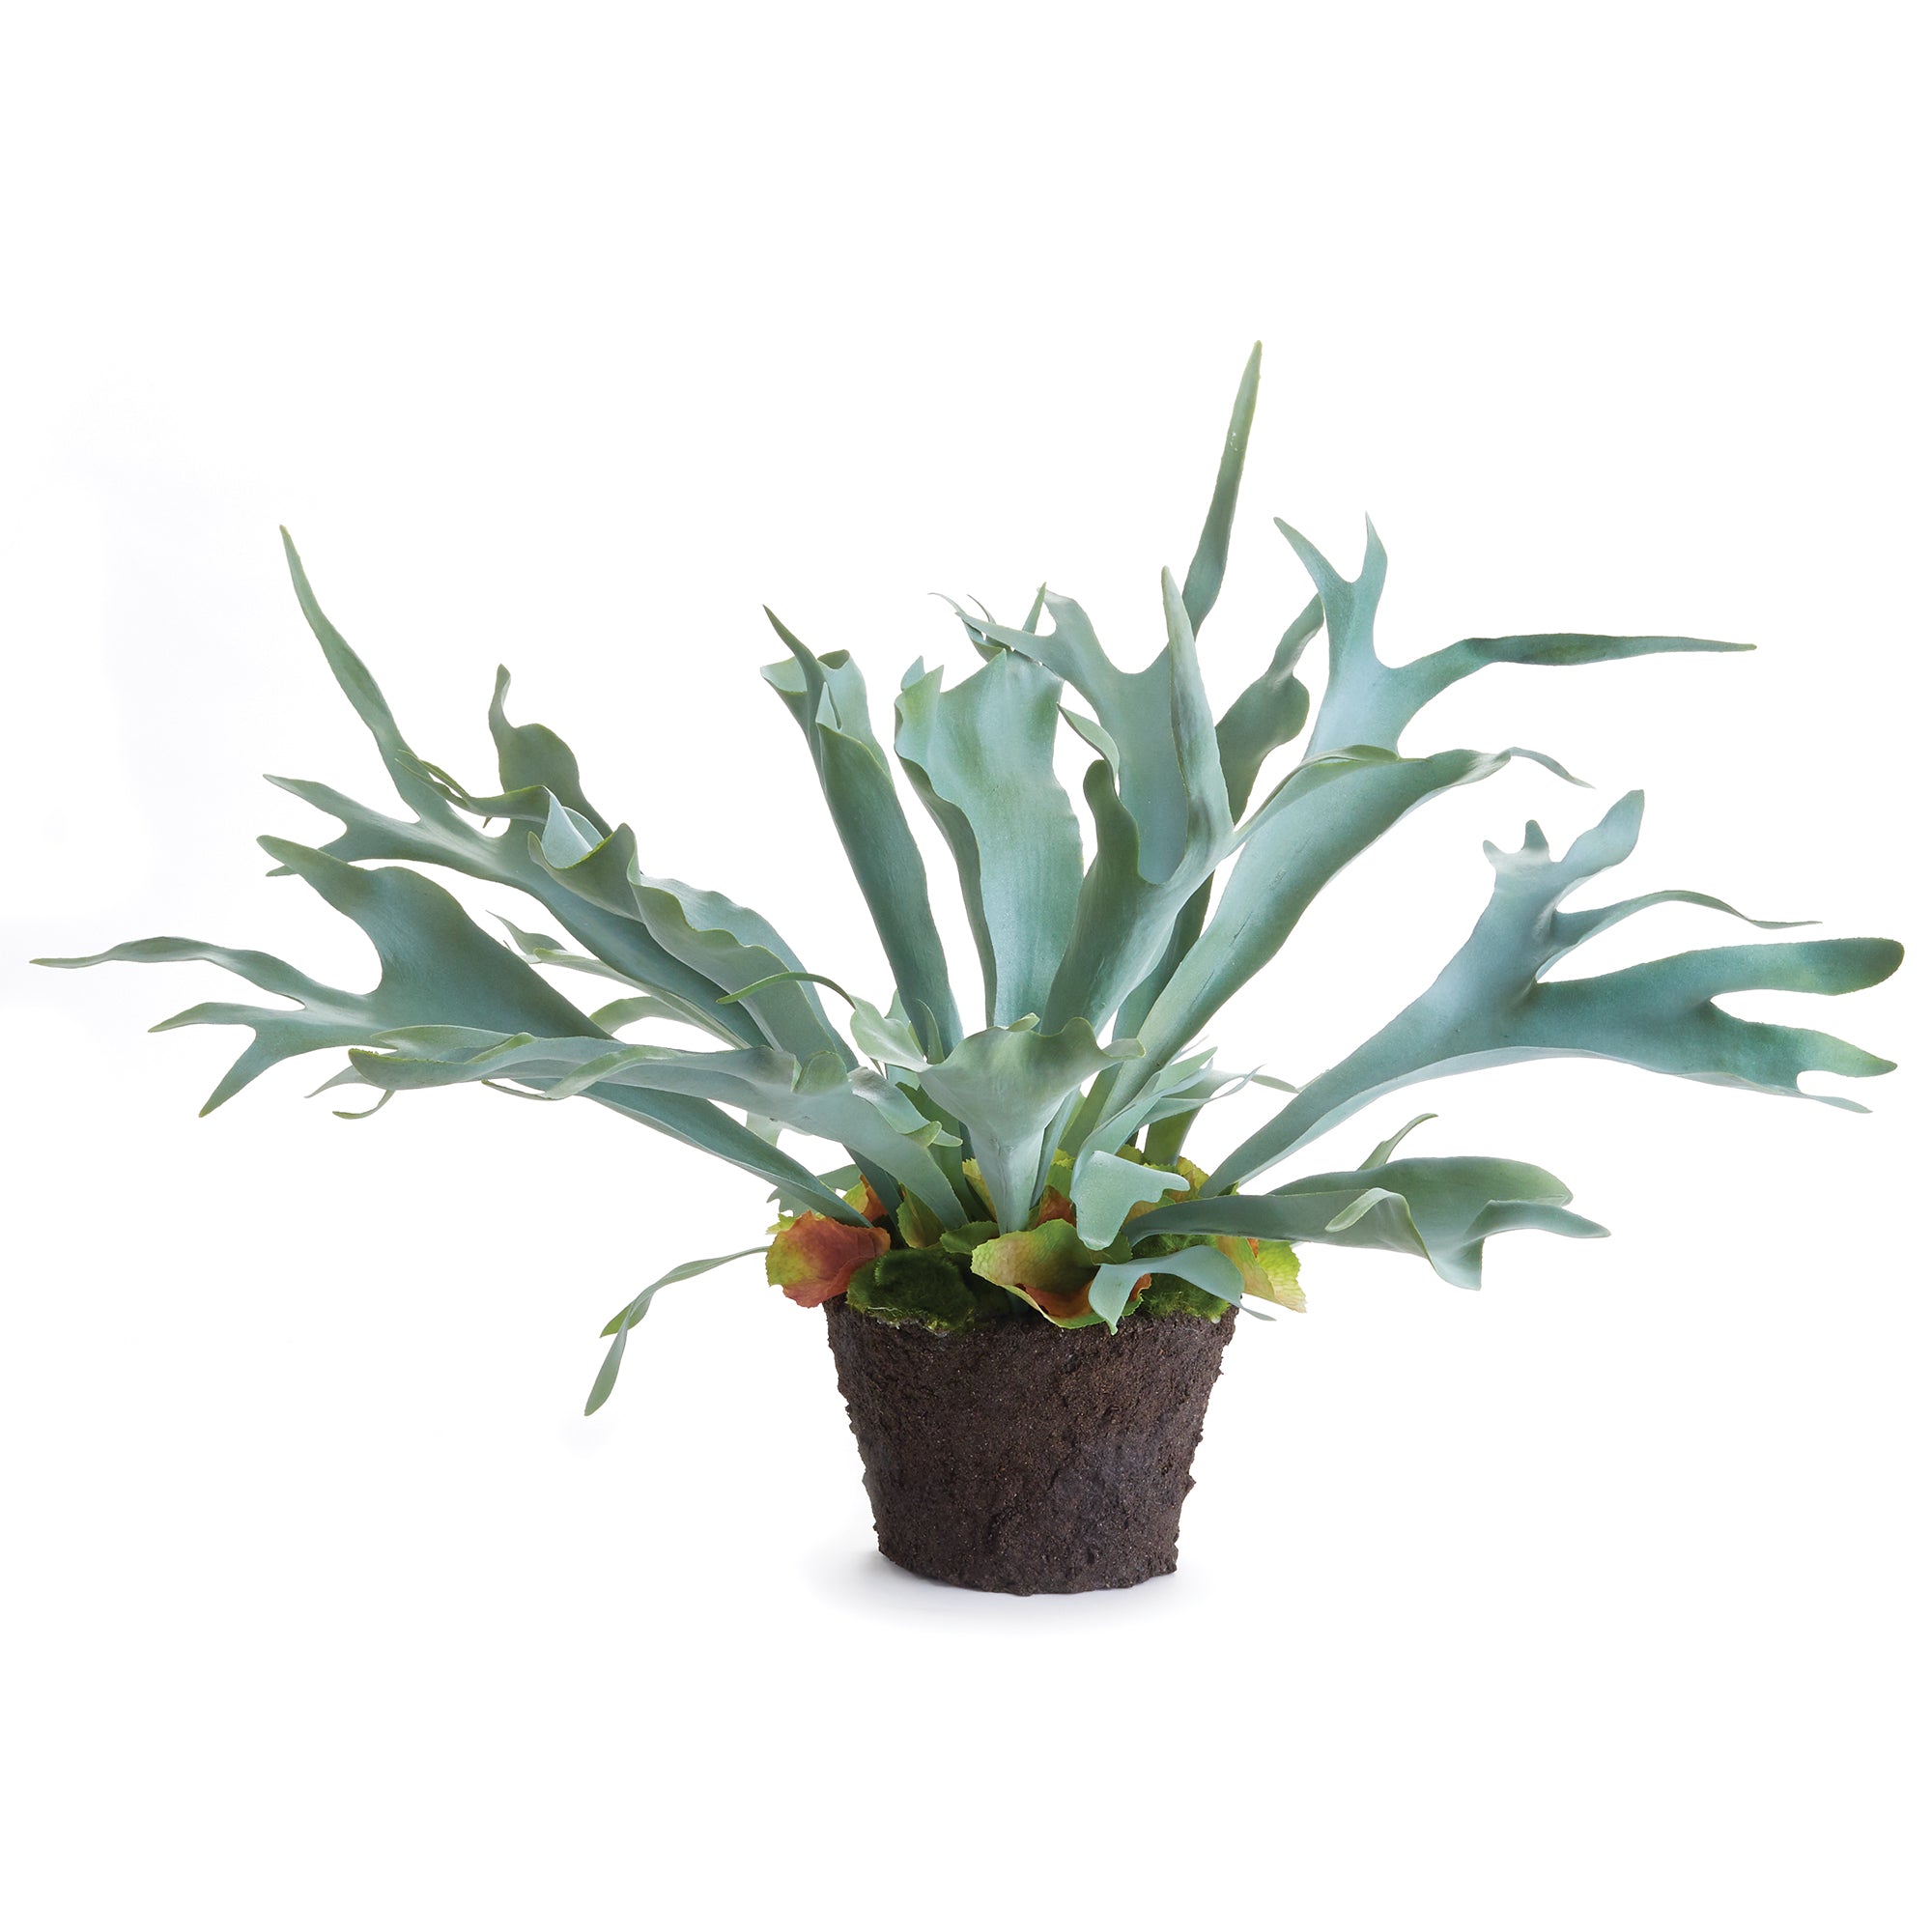 The Staghorn Fern is full of high drama, and sure to be a conversation starter. Typically found in wall configurations, we bring this uniquely free-standing beauty to the table. Amethyst Home provides interior design, new construction, custom furniture, and area rugs in the Scottsdale metro area.